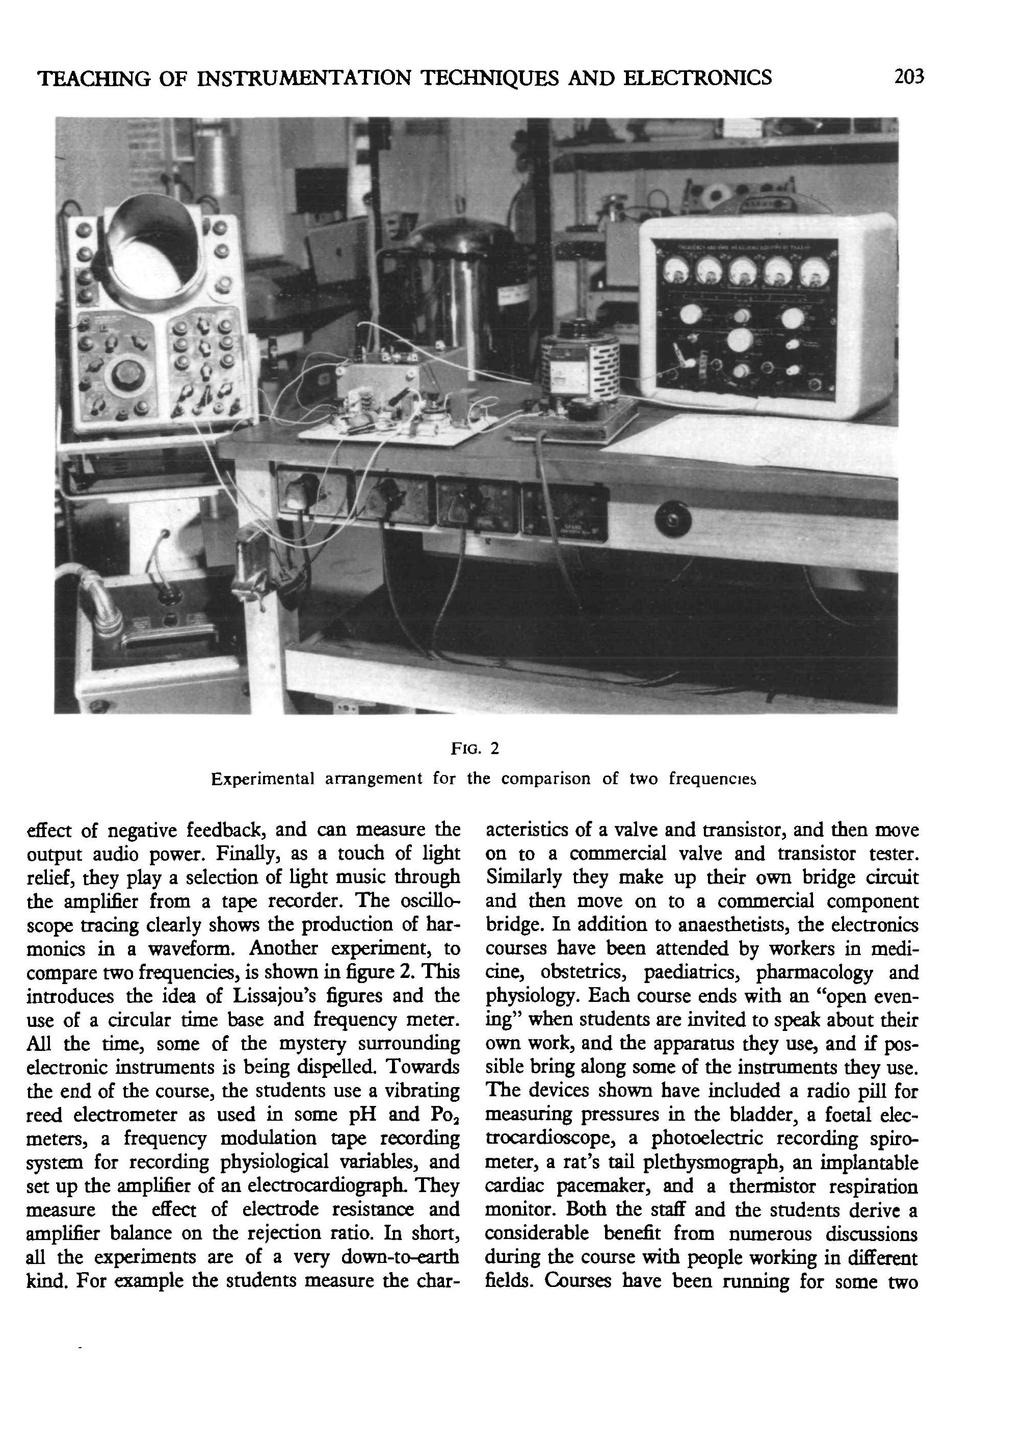 TEACHING OF INSTRUMENTATION TECHNIQUES AND ELECTRONICS FIG. 2Q5 2 Experimental arrangement for the comparison of two frequencies effect of negative feedback, and can measure the output audio power.